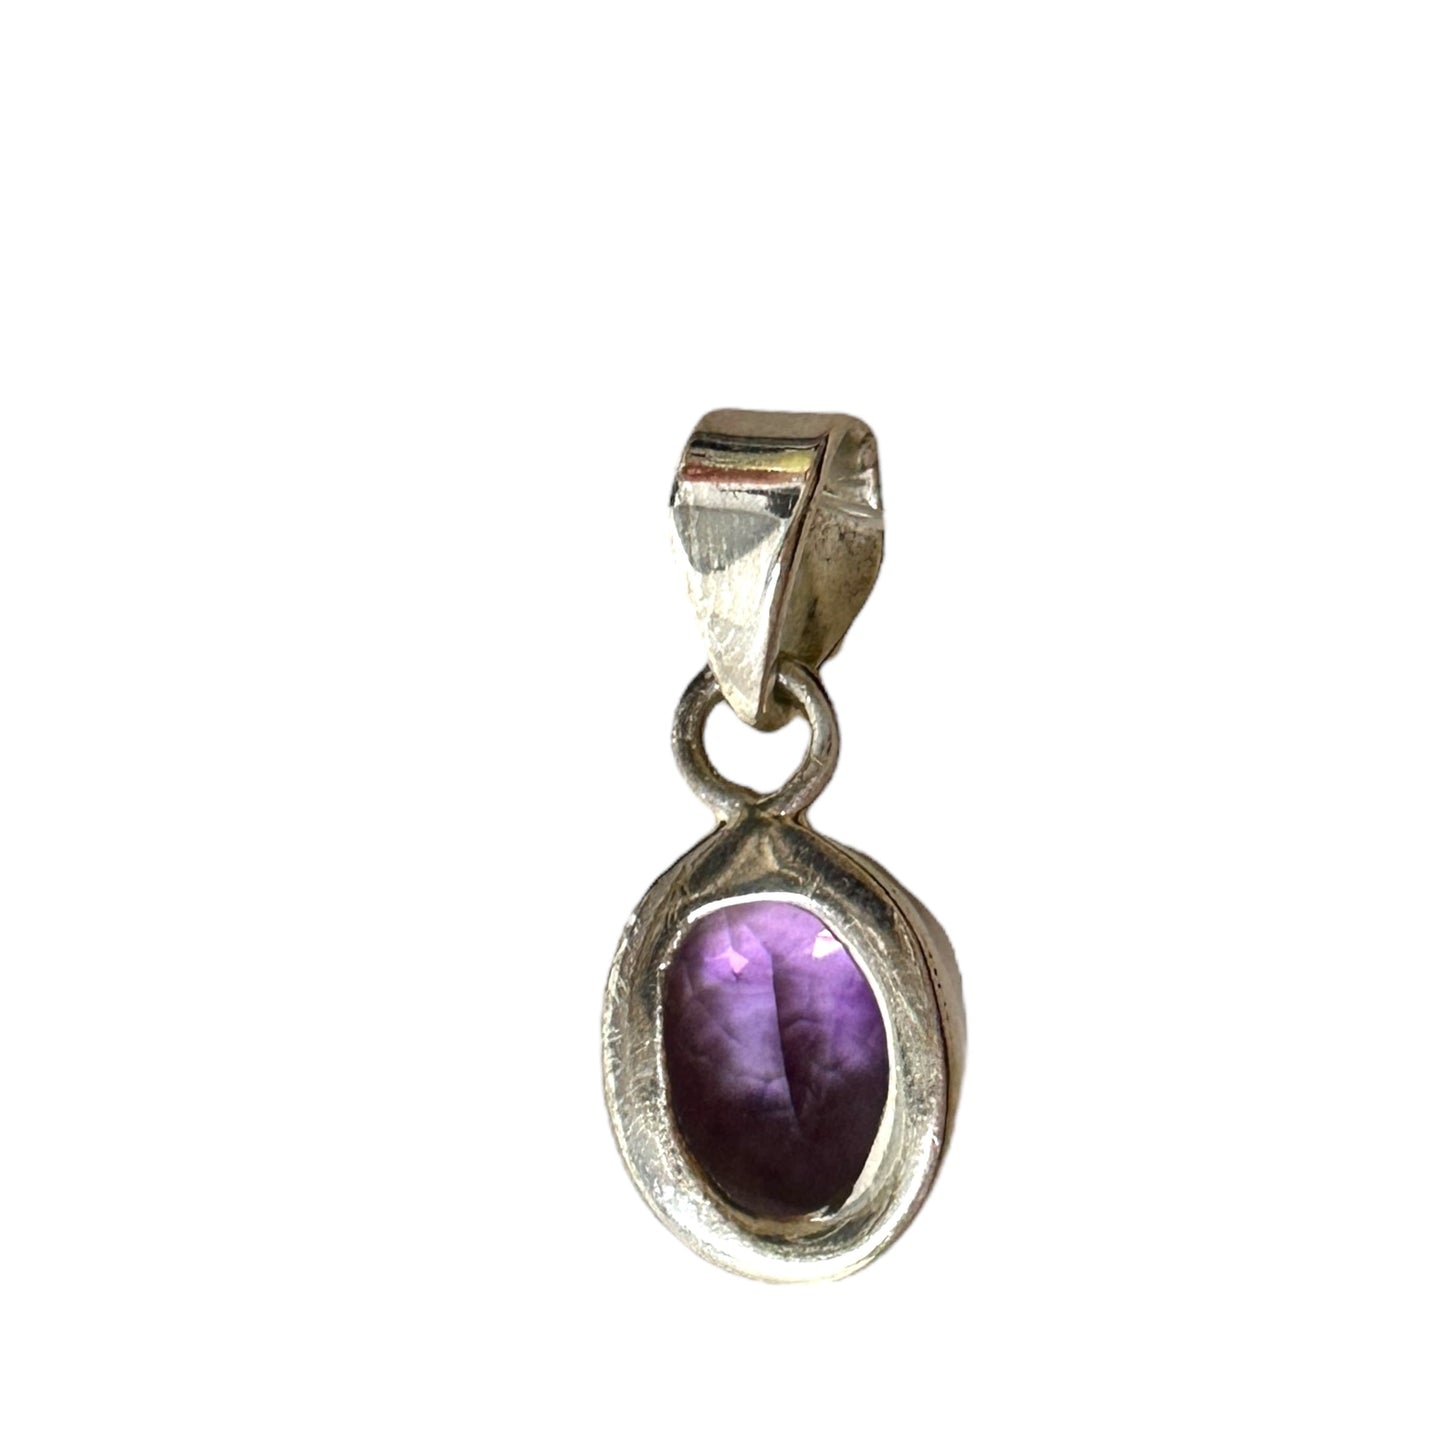 Amethyst & Sterling Silver Pendant Unknown Brand